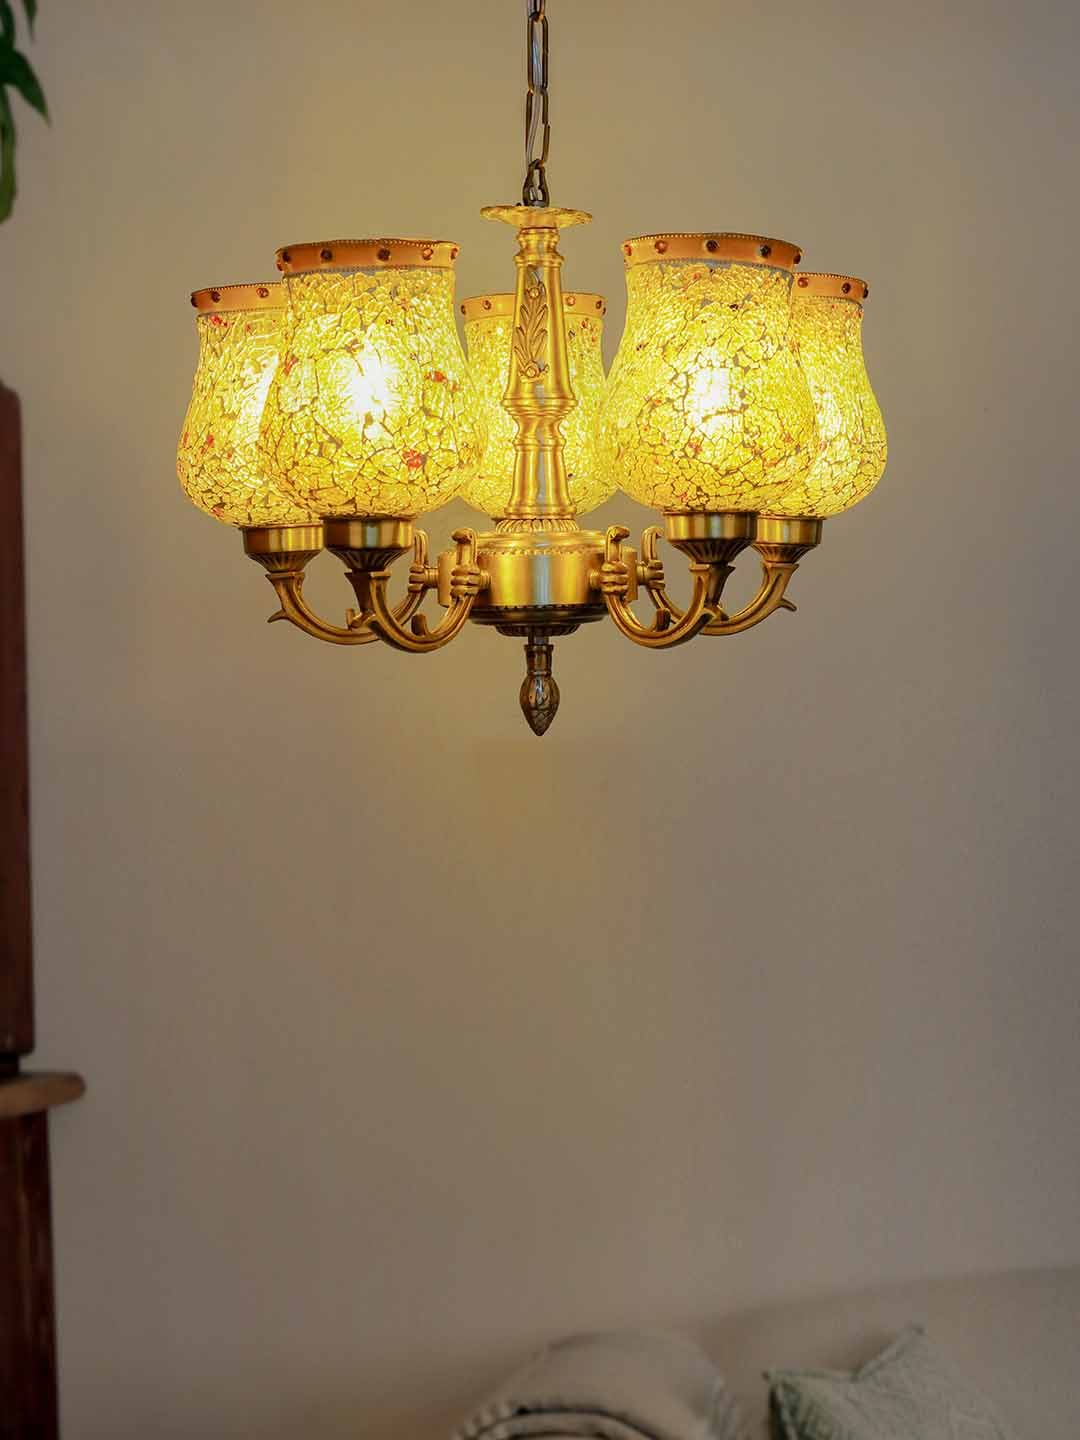 Antique Brass Small 5 Light Chandelier with Yellow Mosaic Glass with lights on